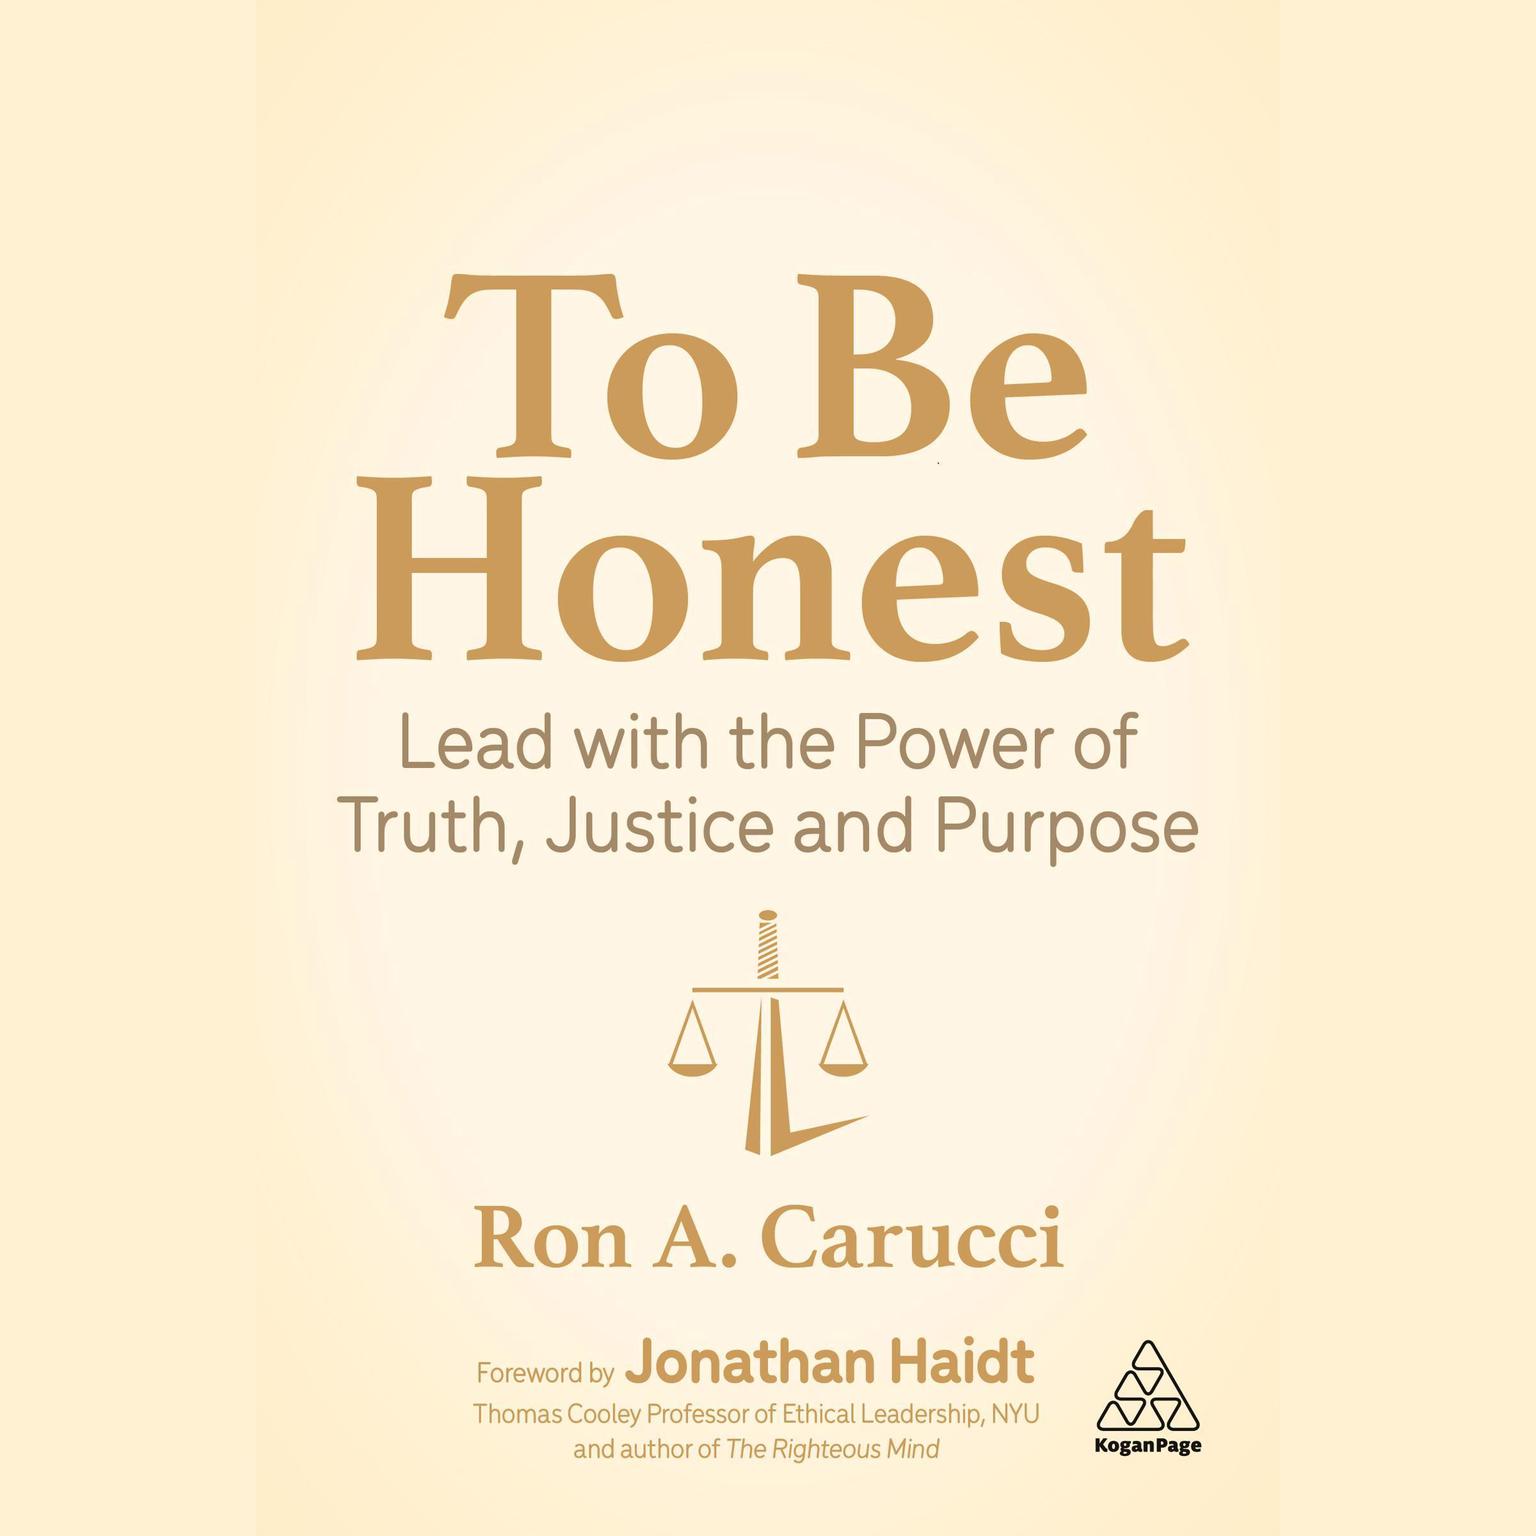 To Be Honest: Lead with the Power of Truth, Justice and Purpose Audiobook, by Ron A. Carucci